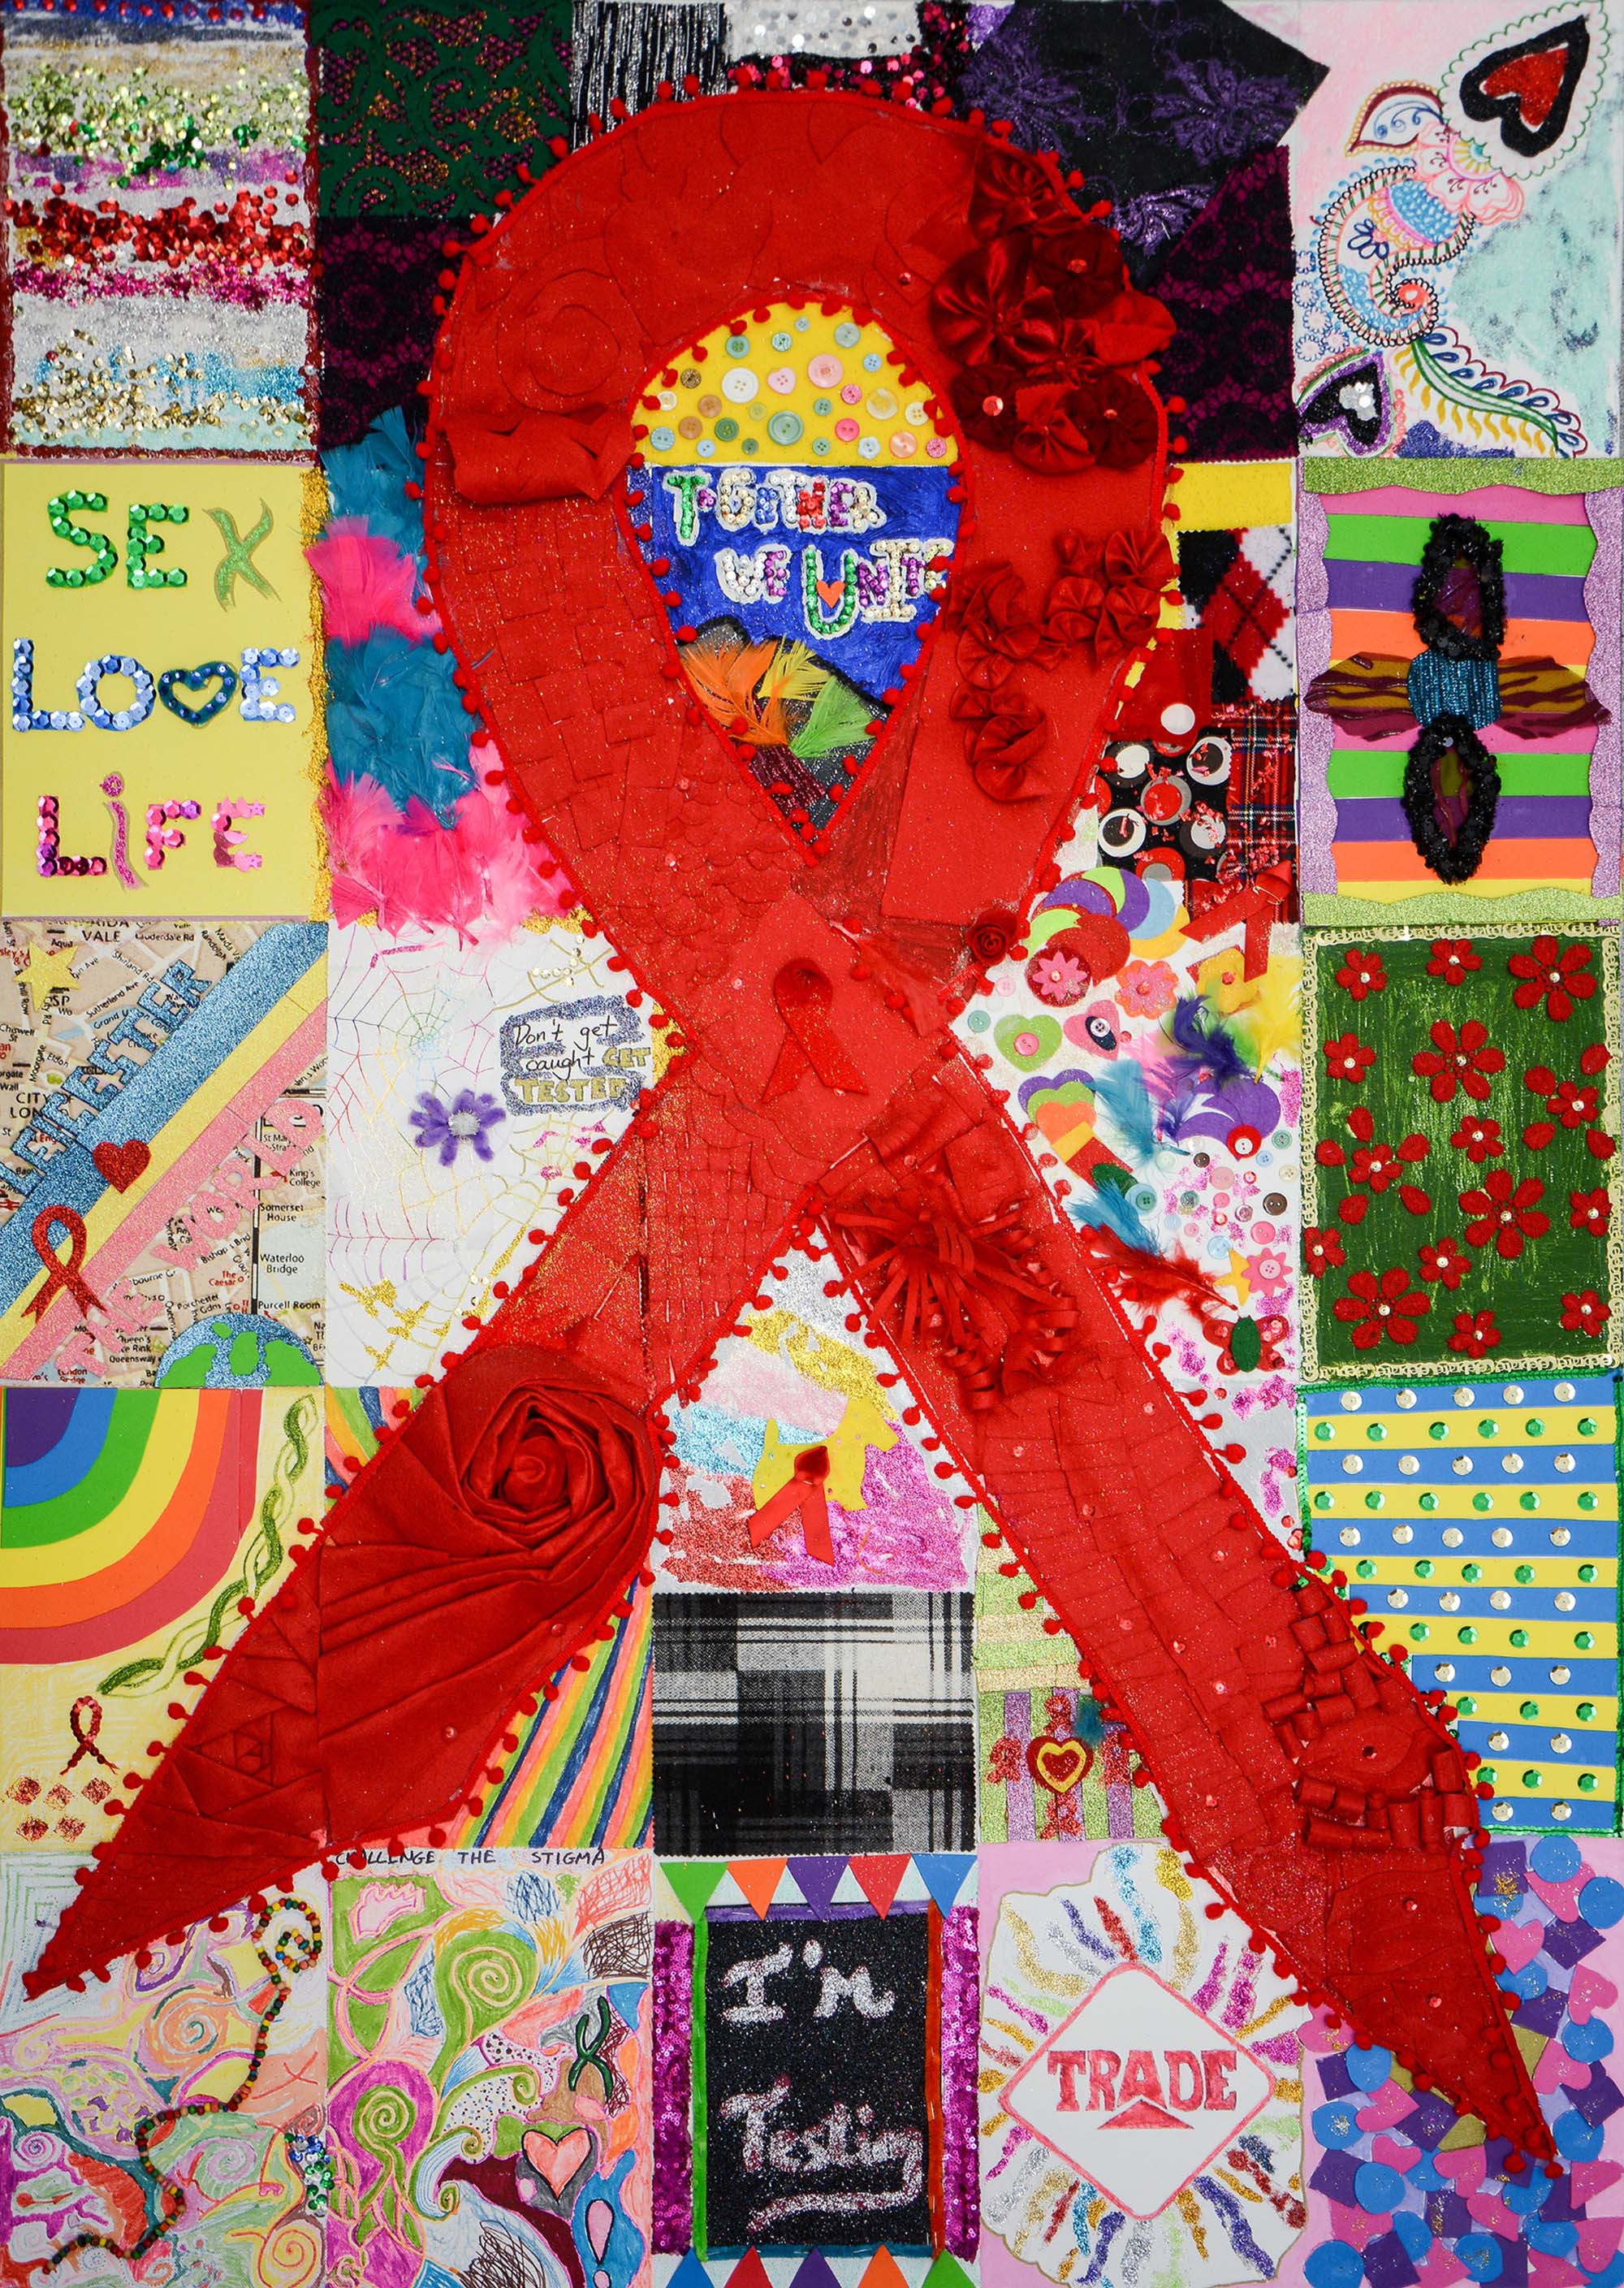 Poster artwork by Trade for World AIDS Day - Trade Sexual Health